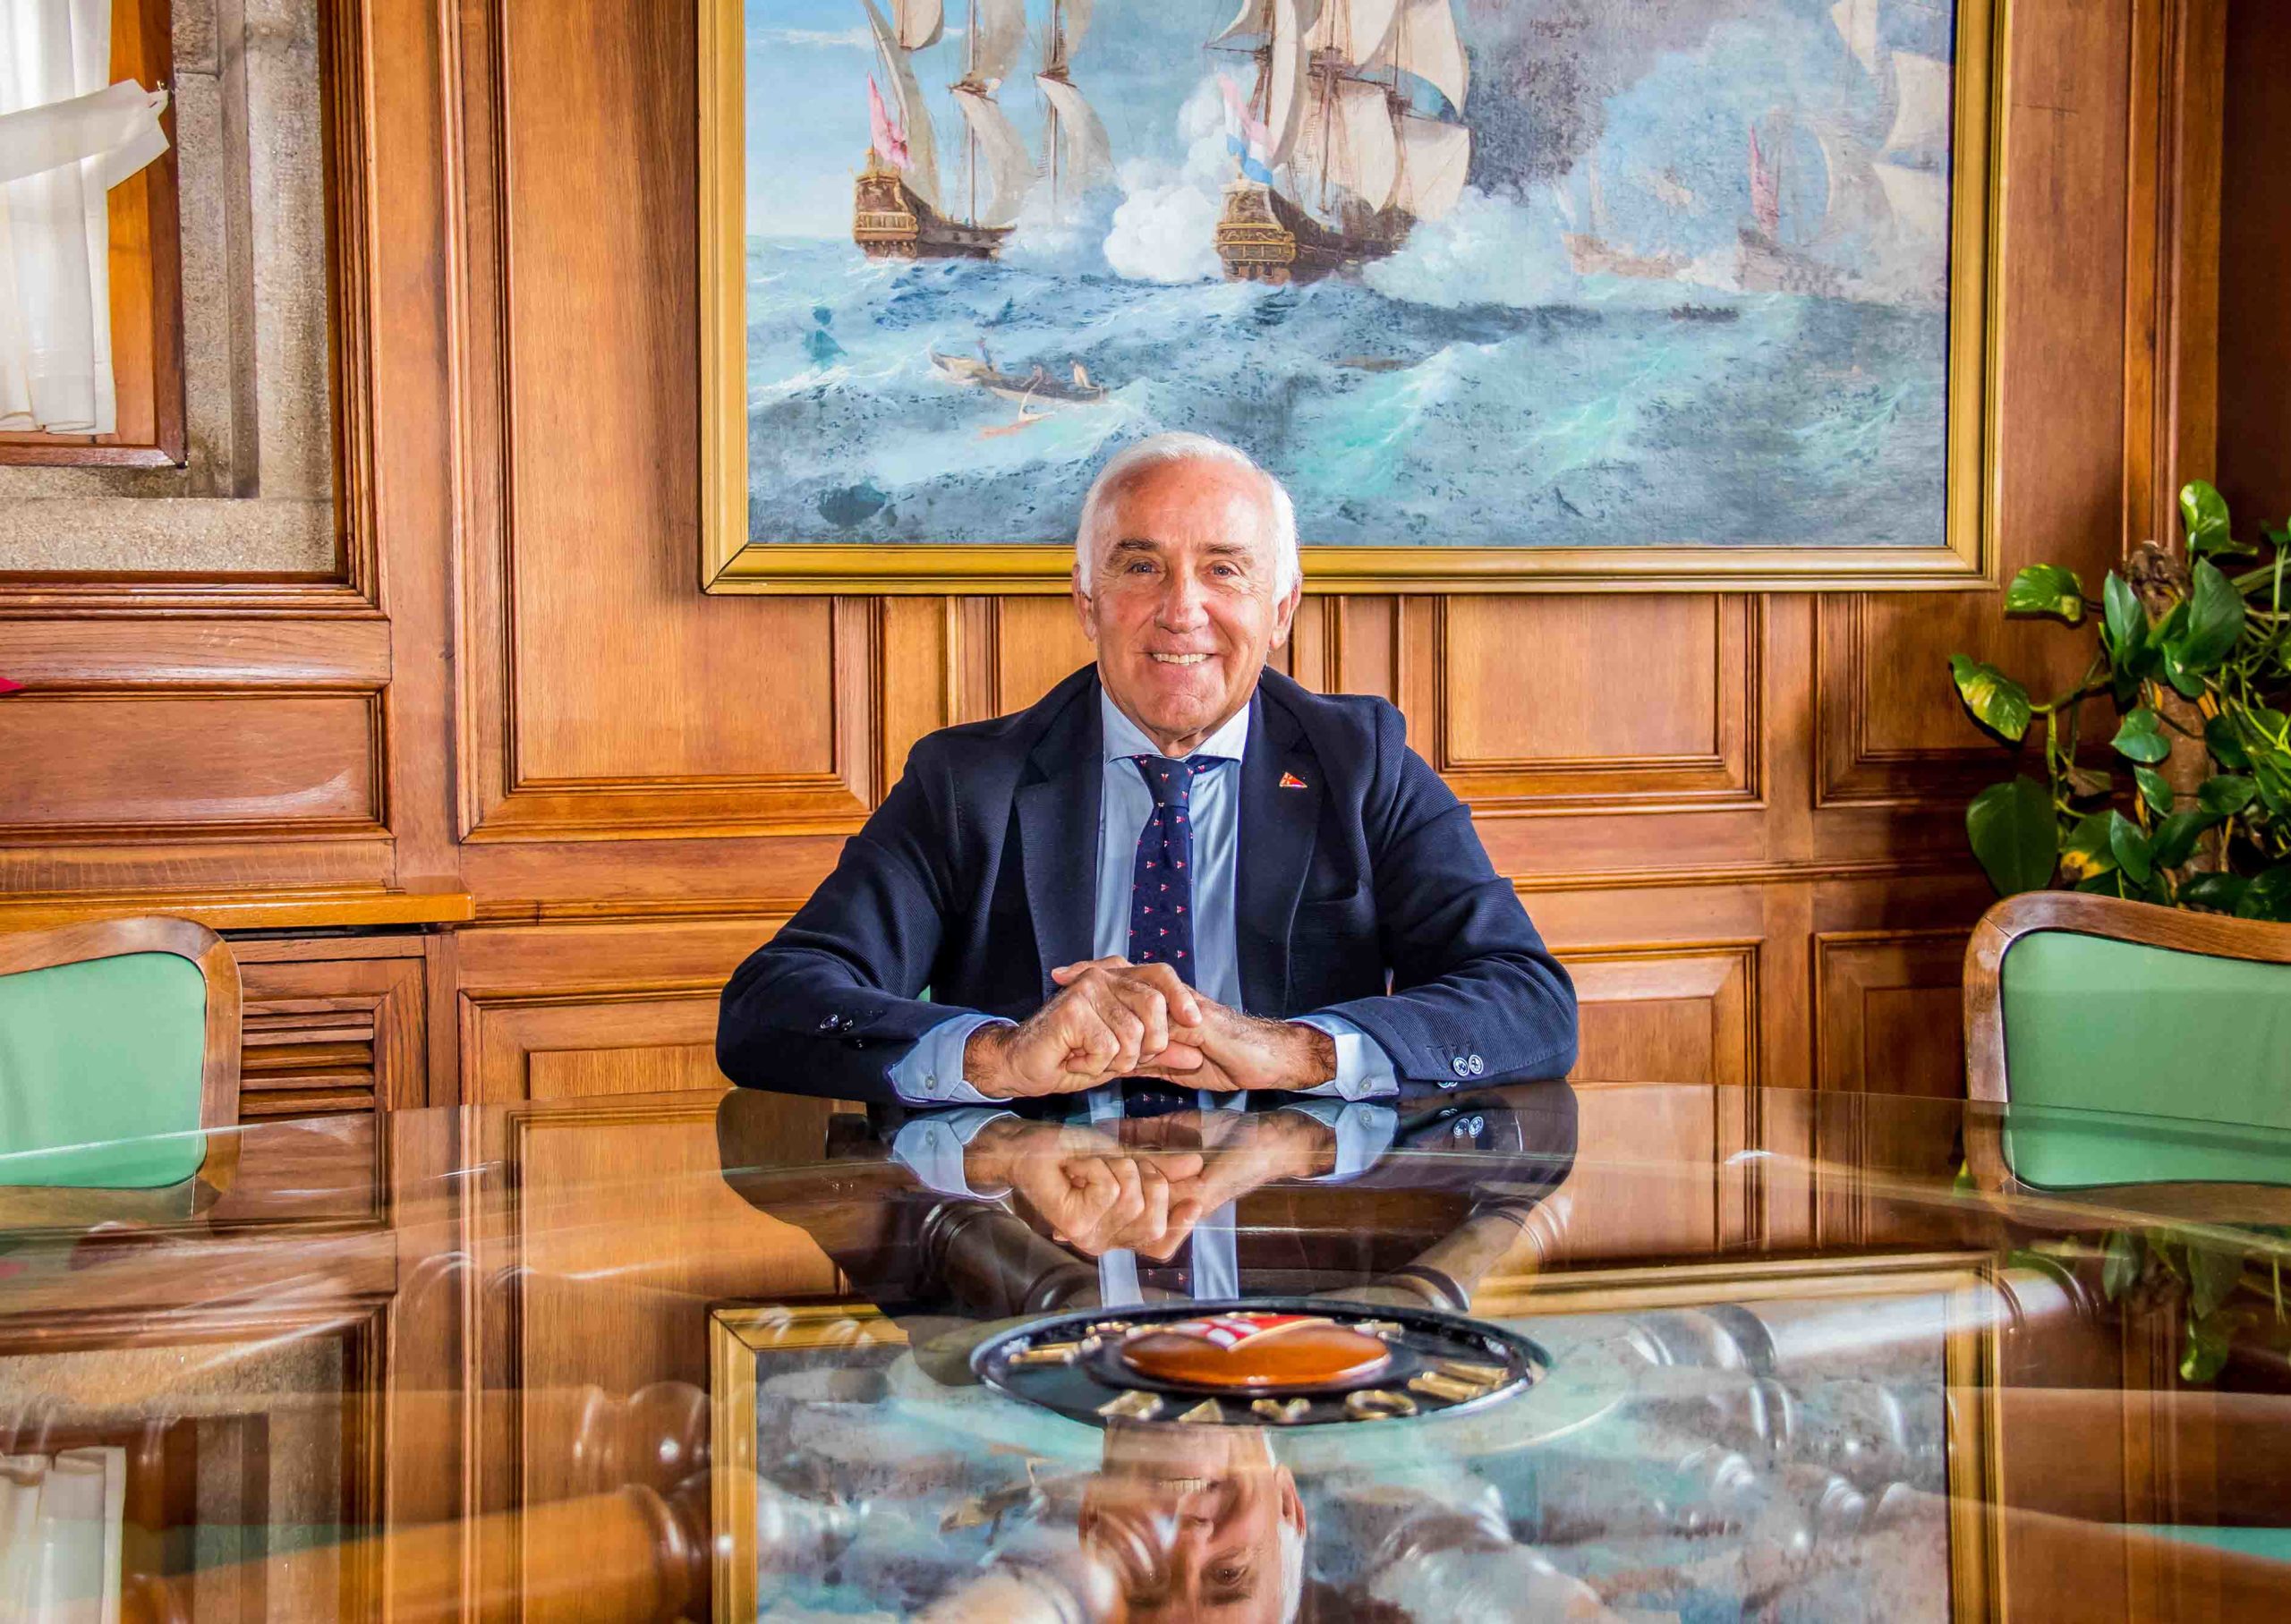 “Monte Real will continue to be a benchmark in the Spanish nautical scene”